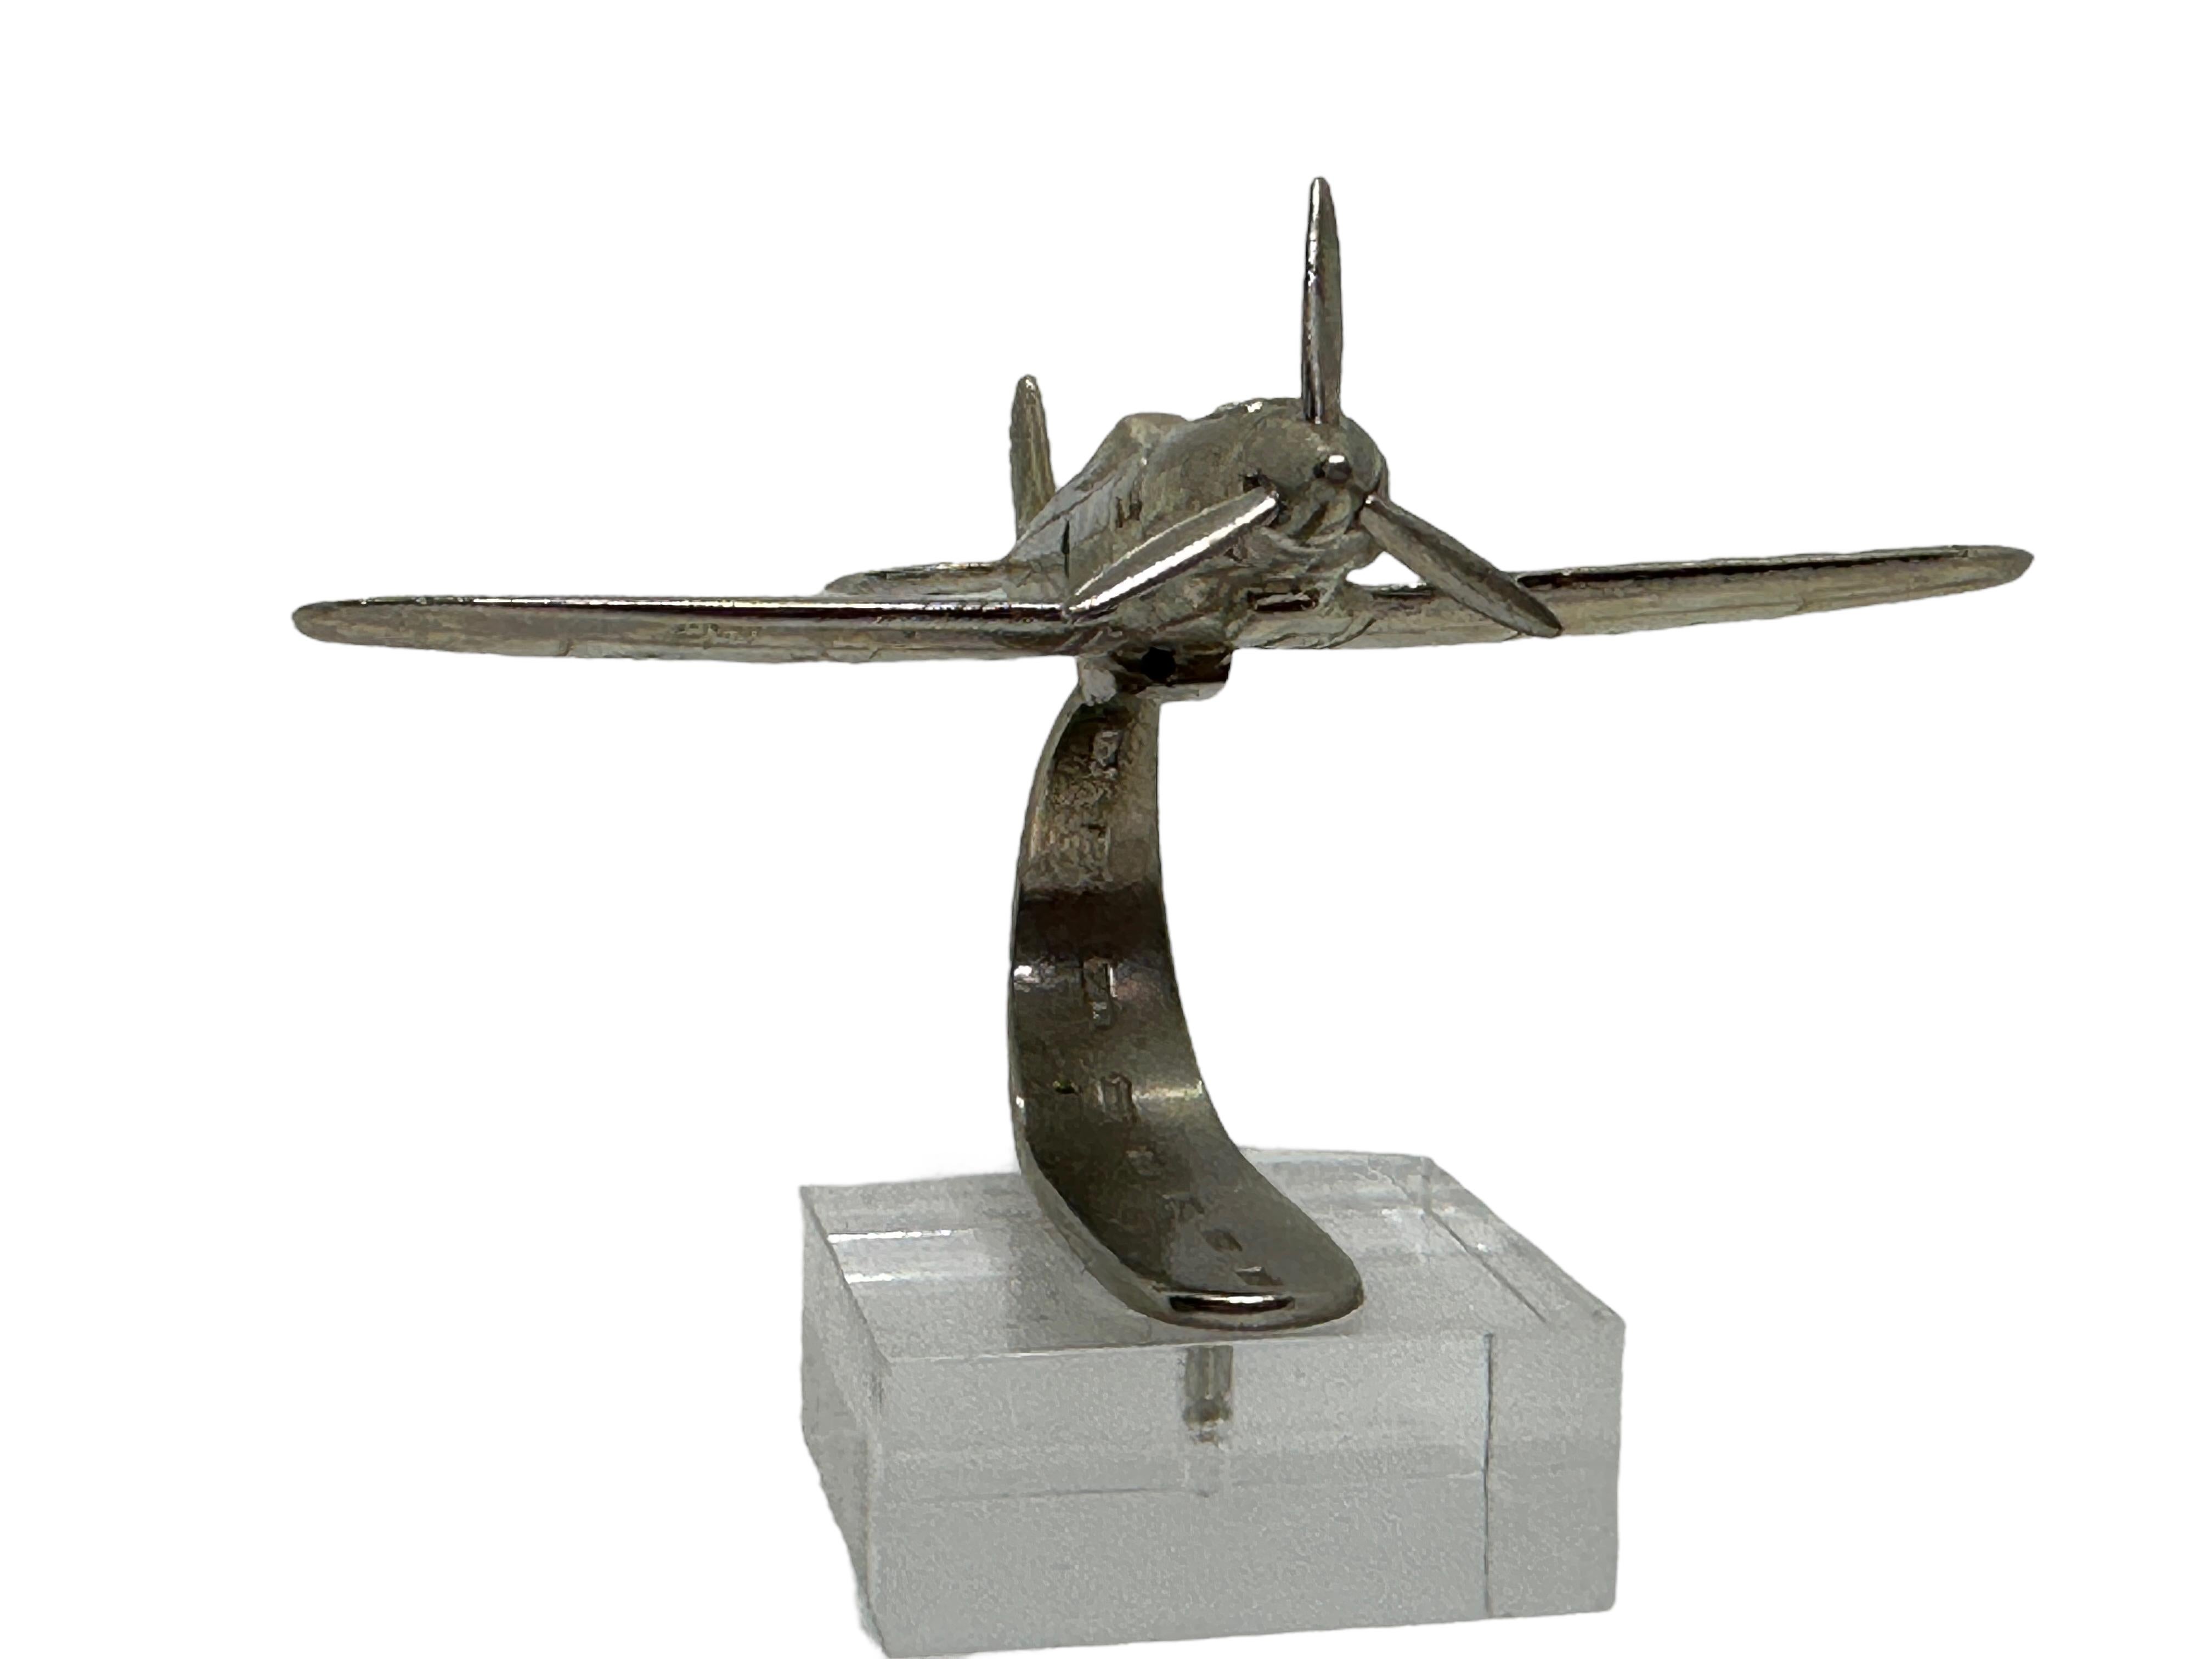 An Industrial plane model made in the 1980s. This unique object is made of metal and has a chrome finish. A nice Industrial sculpture for displaying them on a cupboard, credenza, or desk. Also a nice addition to any collection.